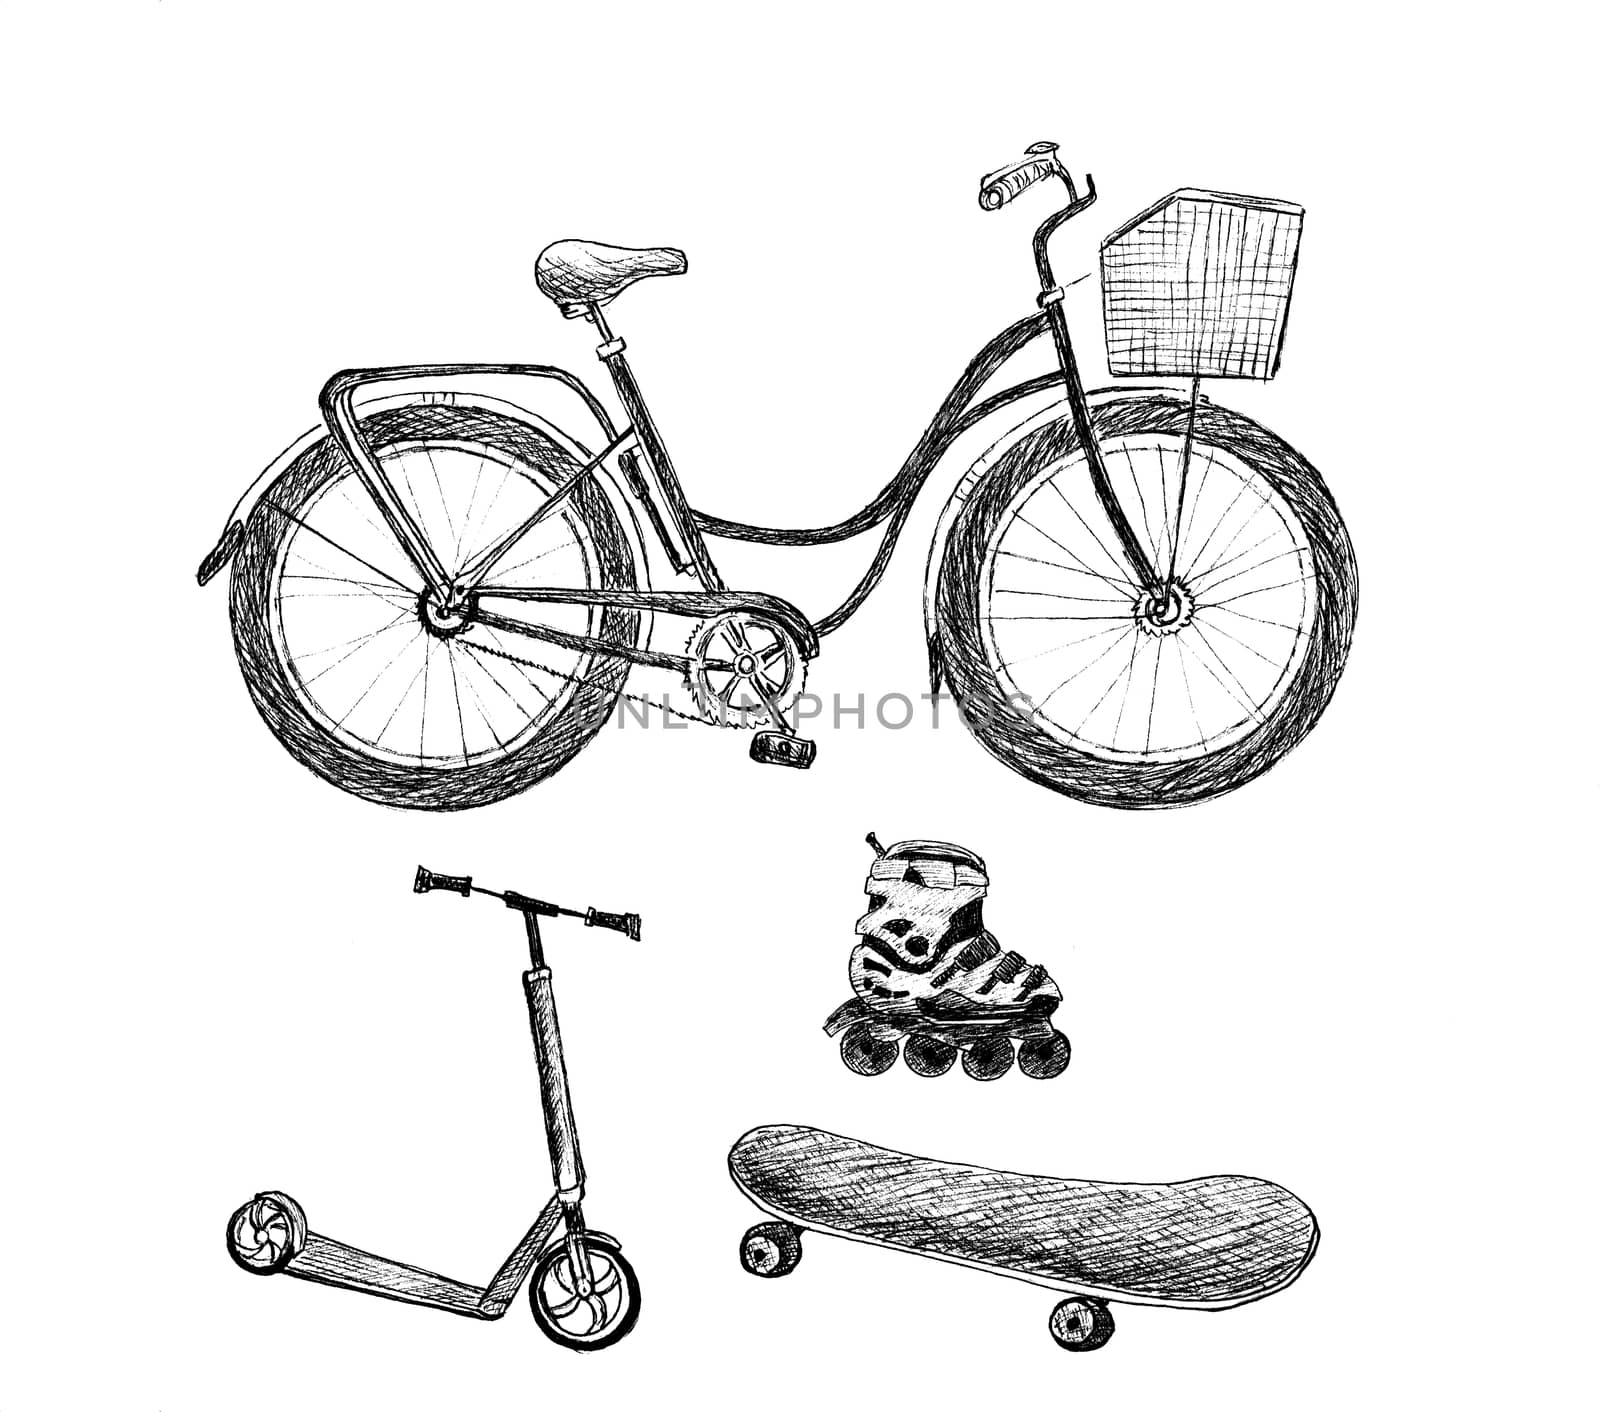 Set of sport transport objects: bicycle, scooter, roller and skateboard. Sketch on white background. Hand-drawn illustration. by sshisshka